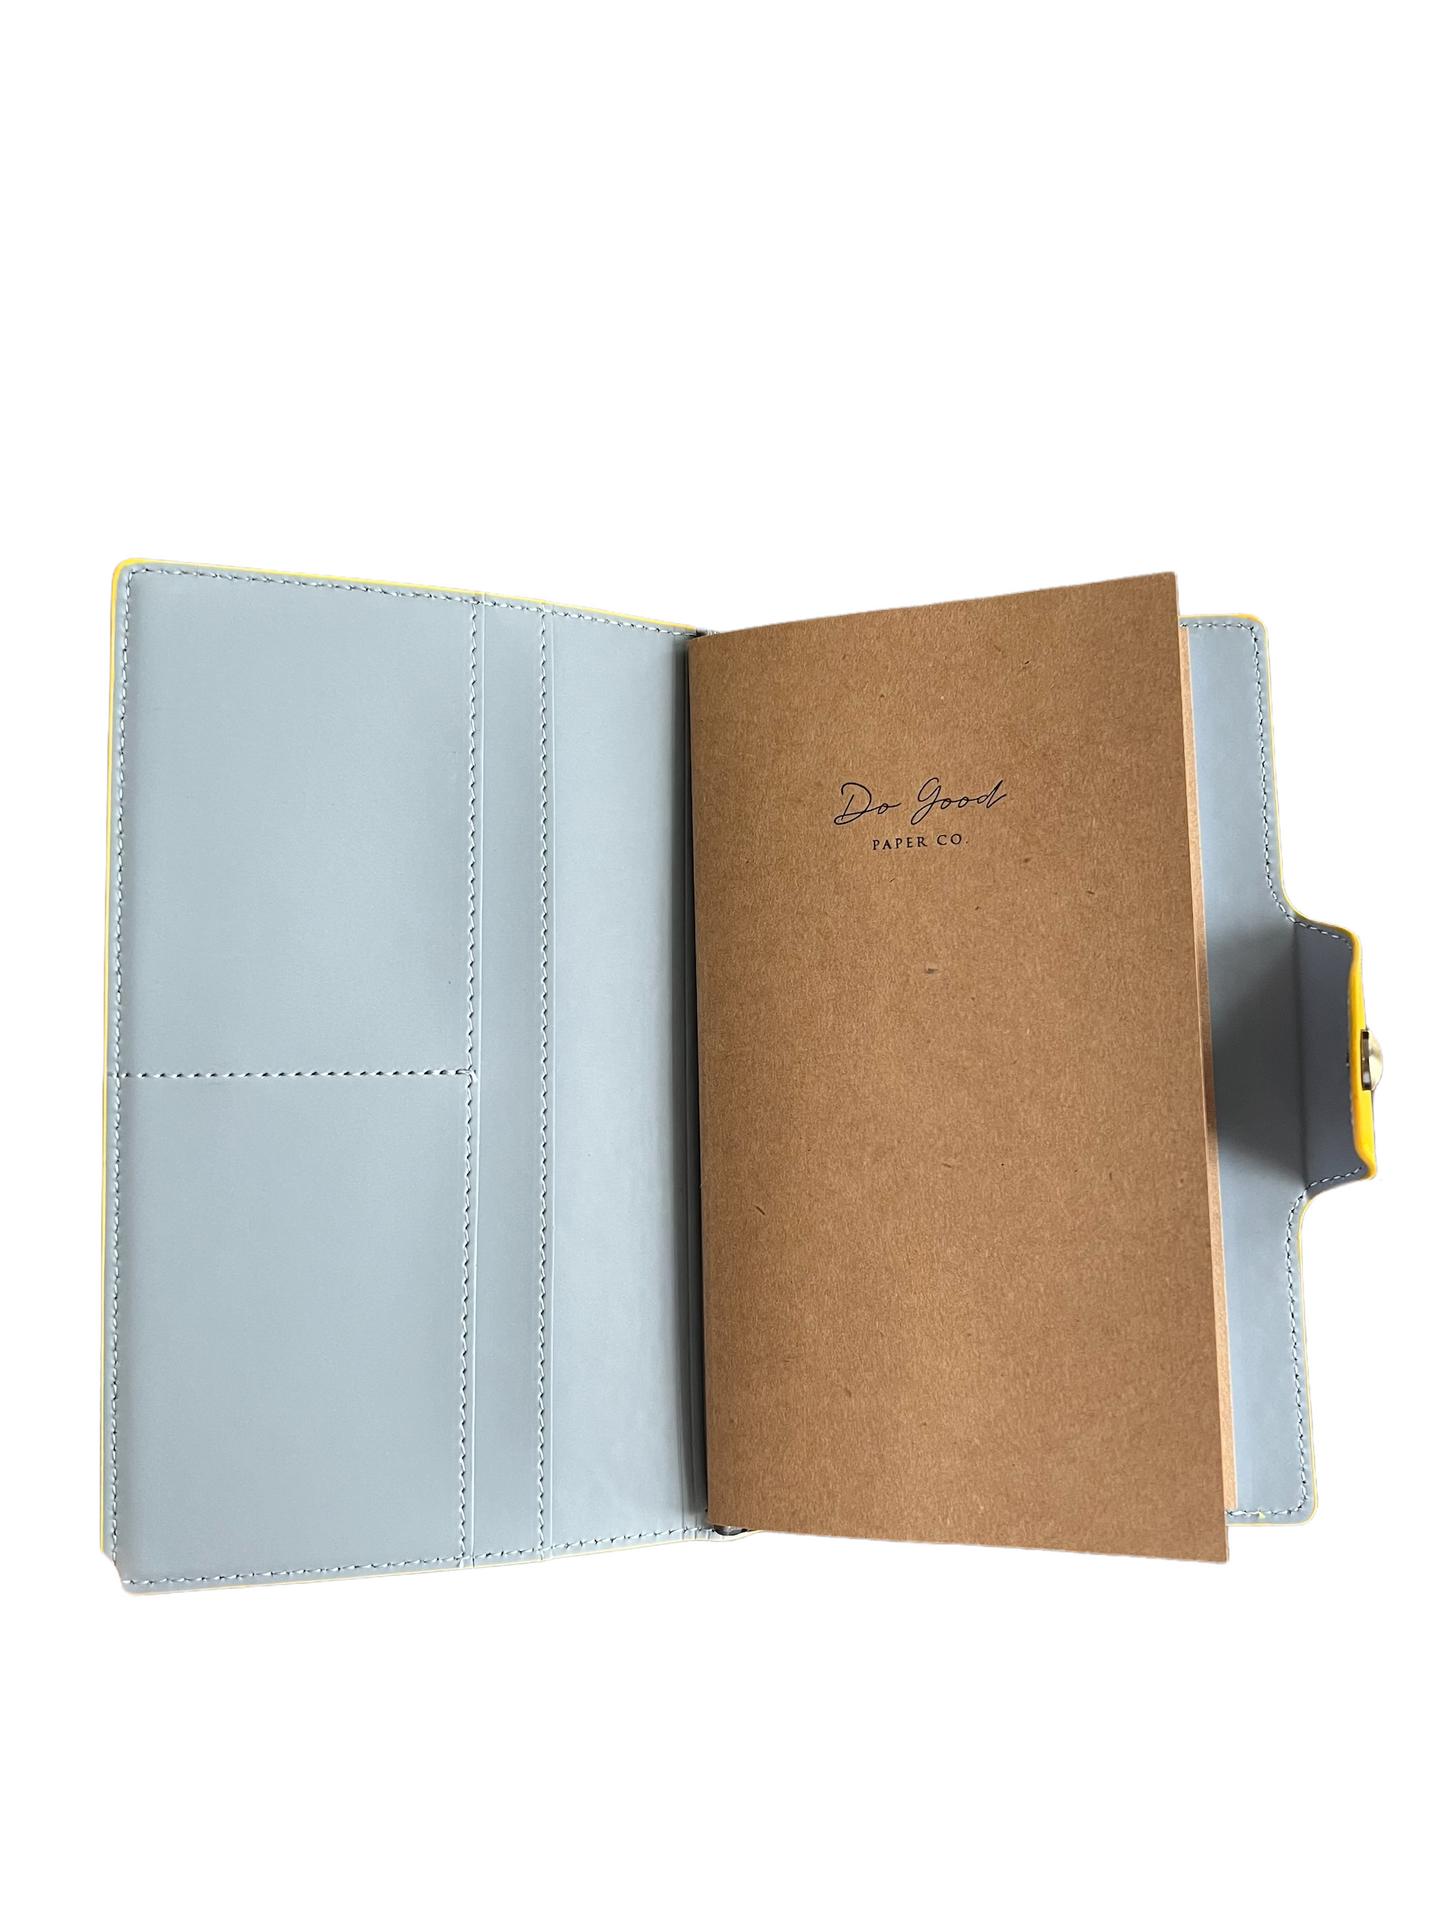 2 Kraft Paper notebooks inside travel folio, lined and blank pages